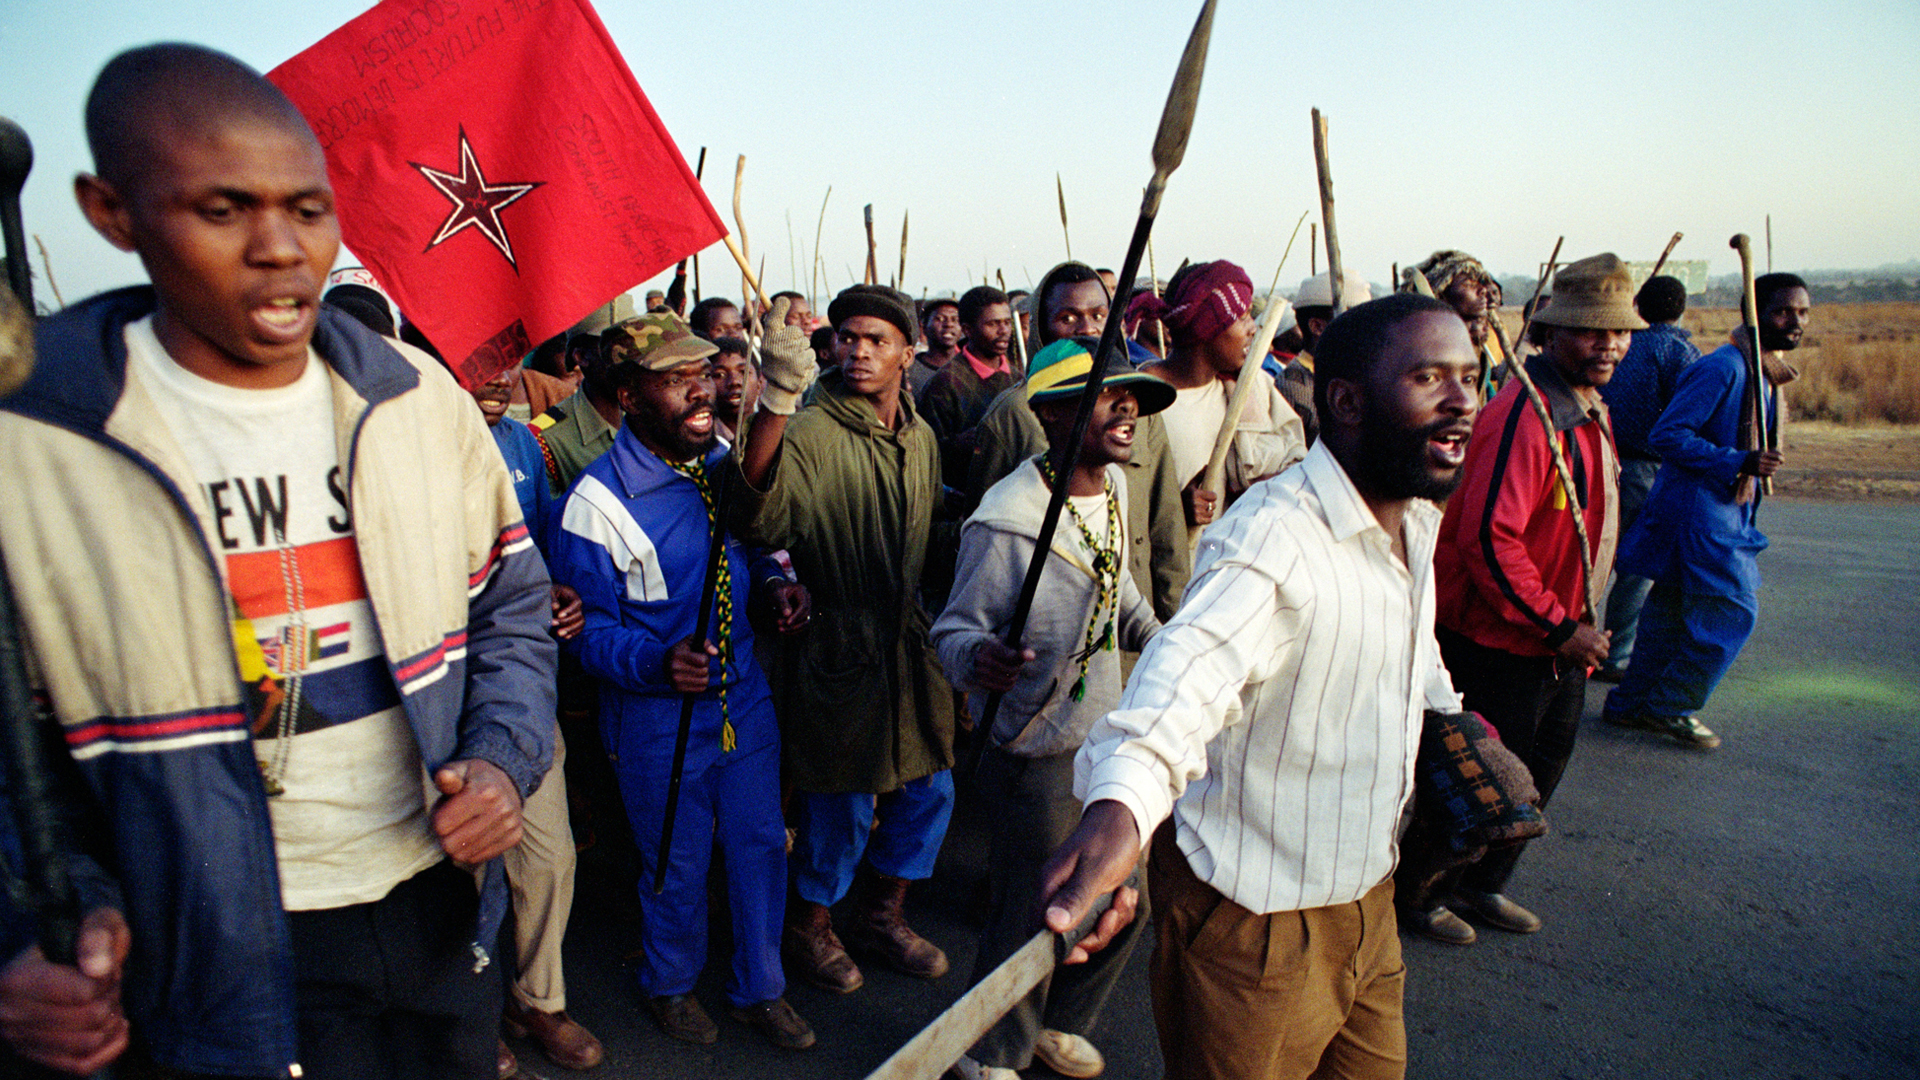 <p>At Boipatong, near Vereeniging, machete-wielding supporters of the Inkatha Freedom Party massacre over 40 “ANC people”, including infants. The police are accused of complicity, and South Africa’s negotiations towards democracy teeter.</p>